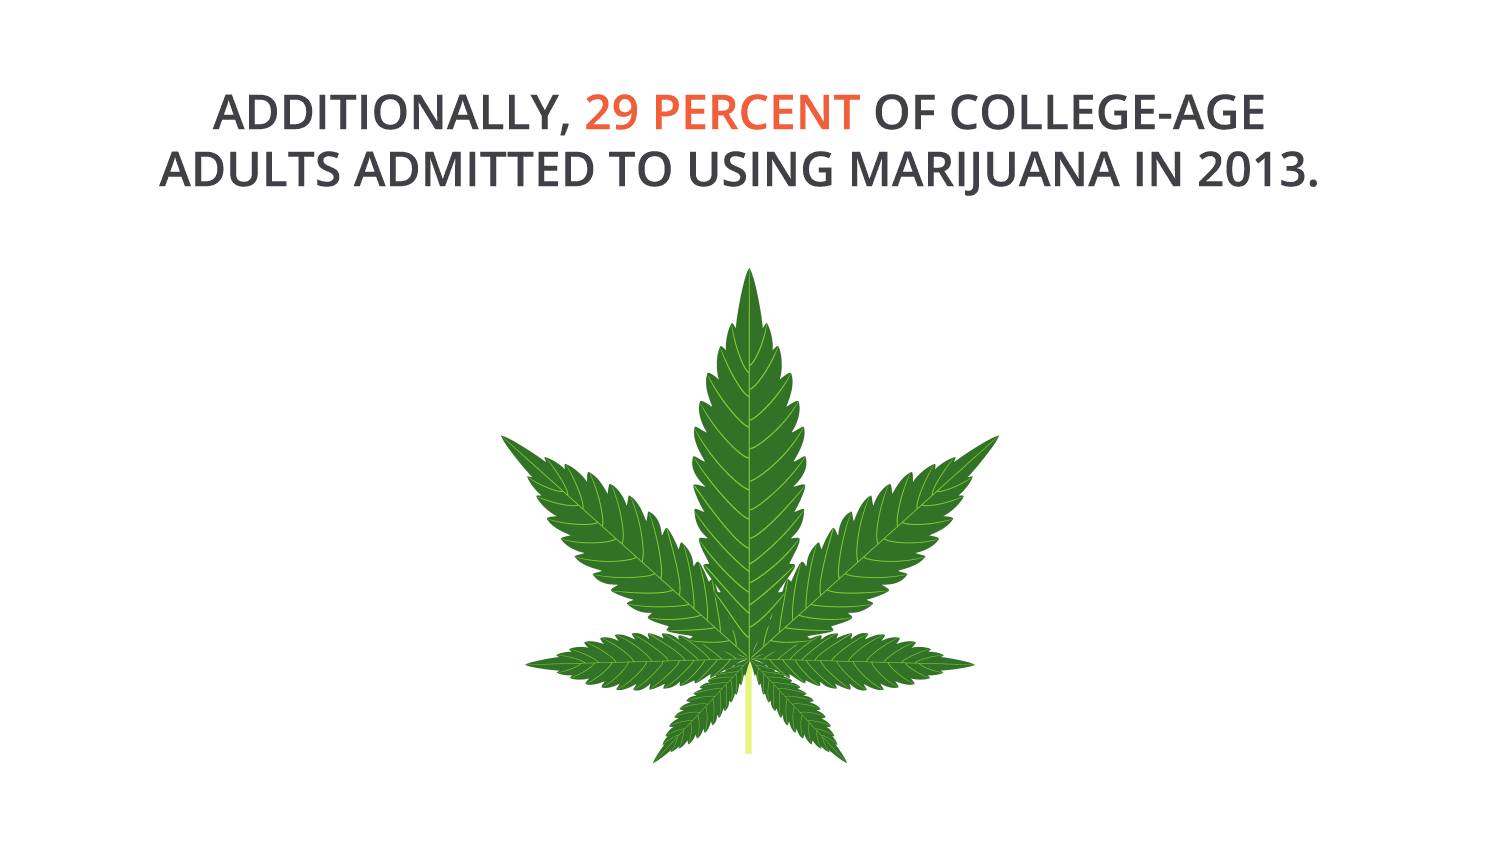 29 percent of college adults addmited to using marijuana in 2013